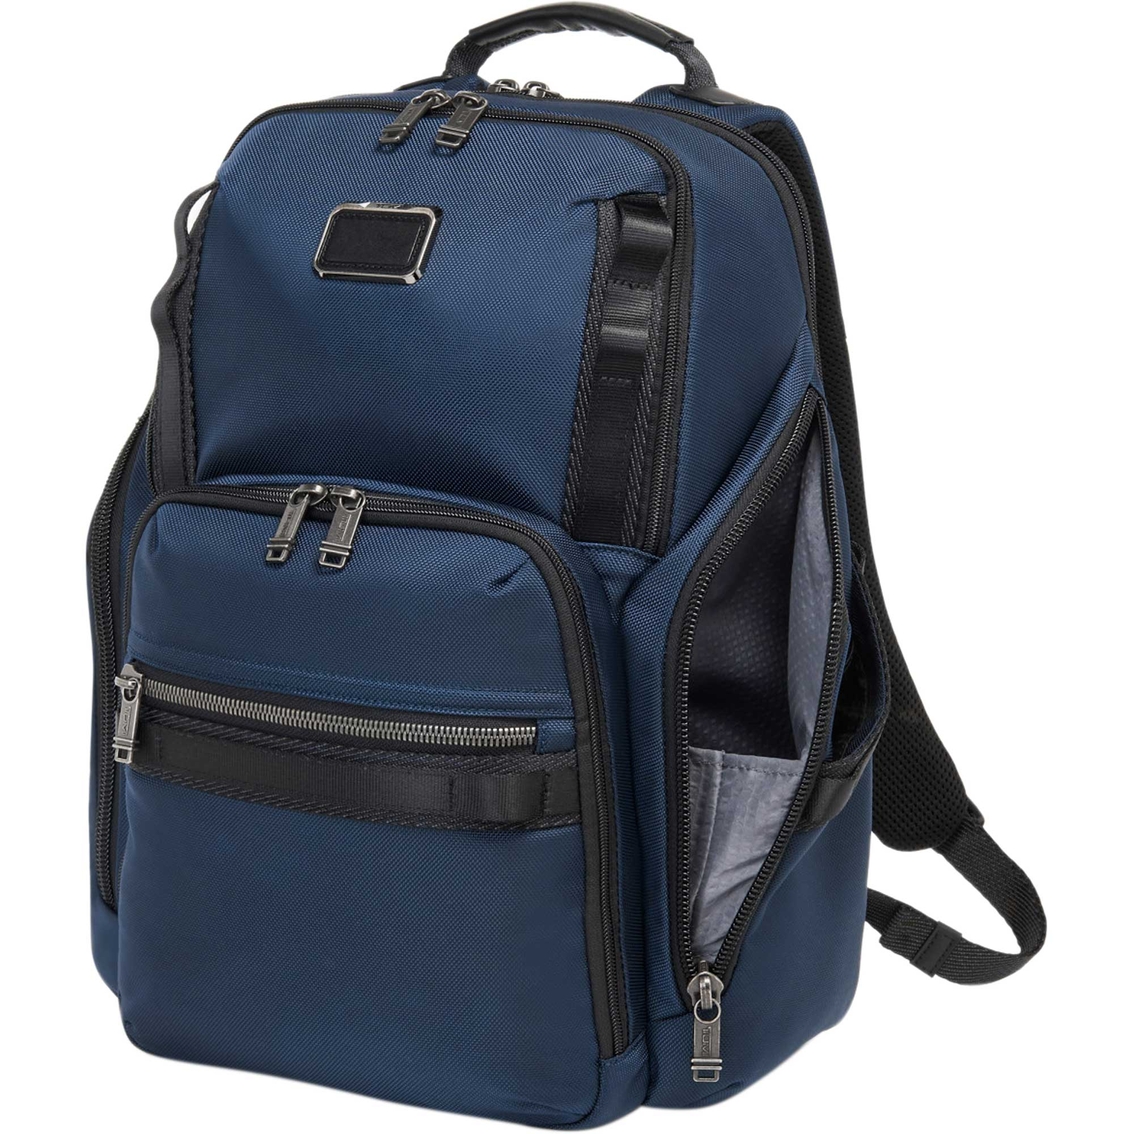 Tumi Search Backpack, Navy - Image 3 of 6